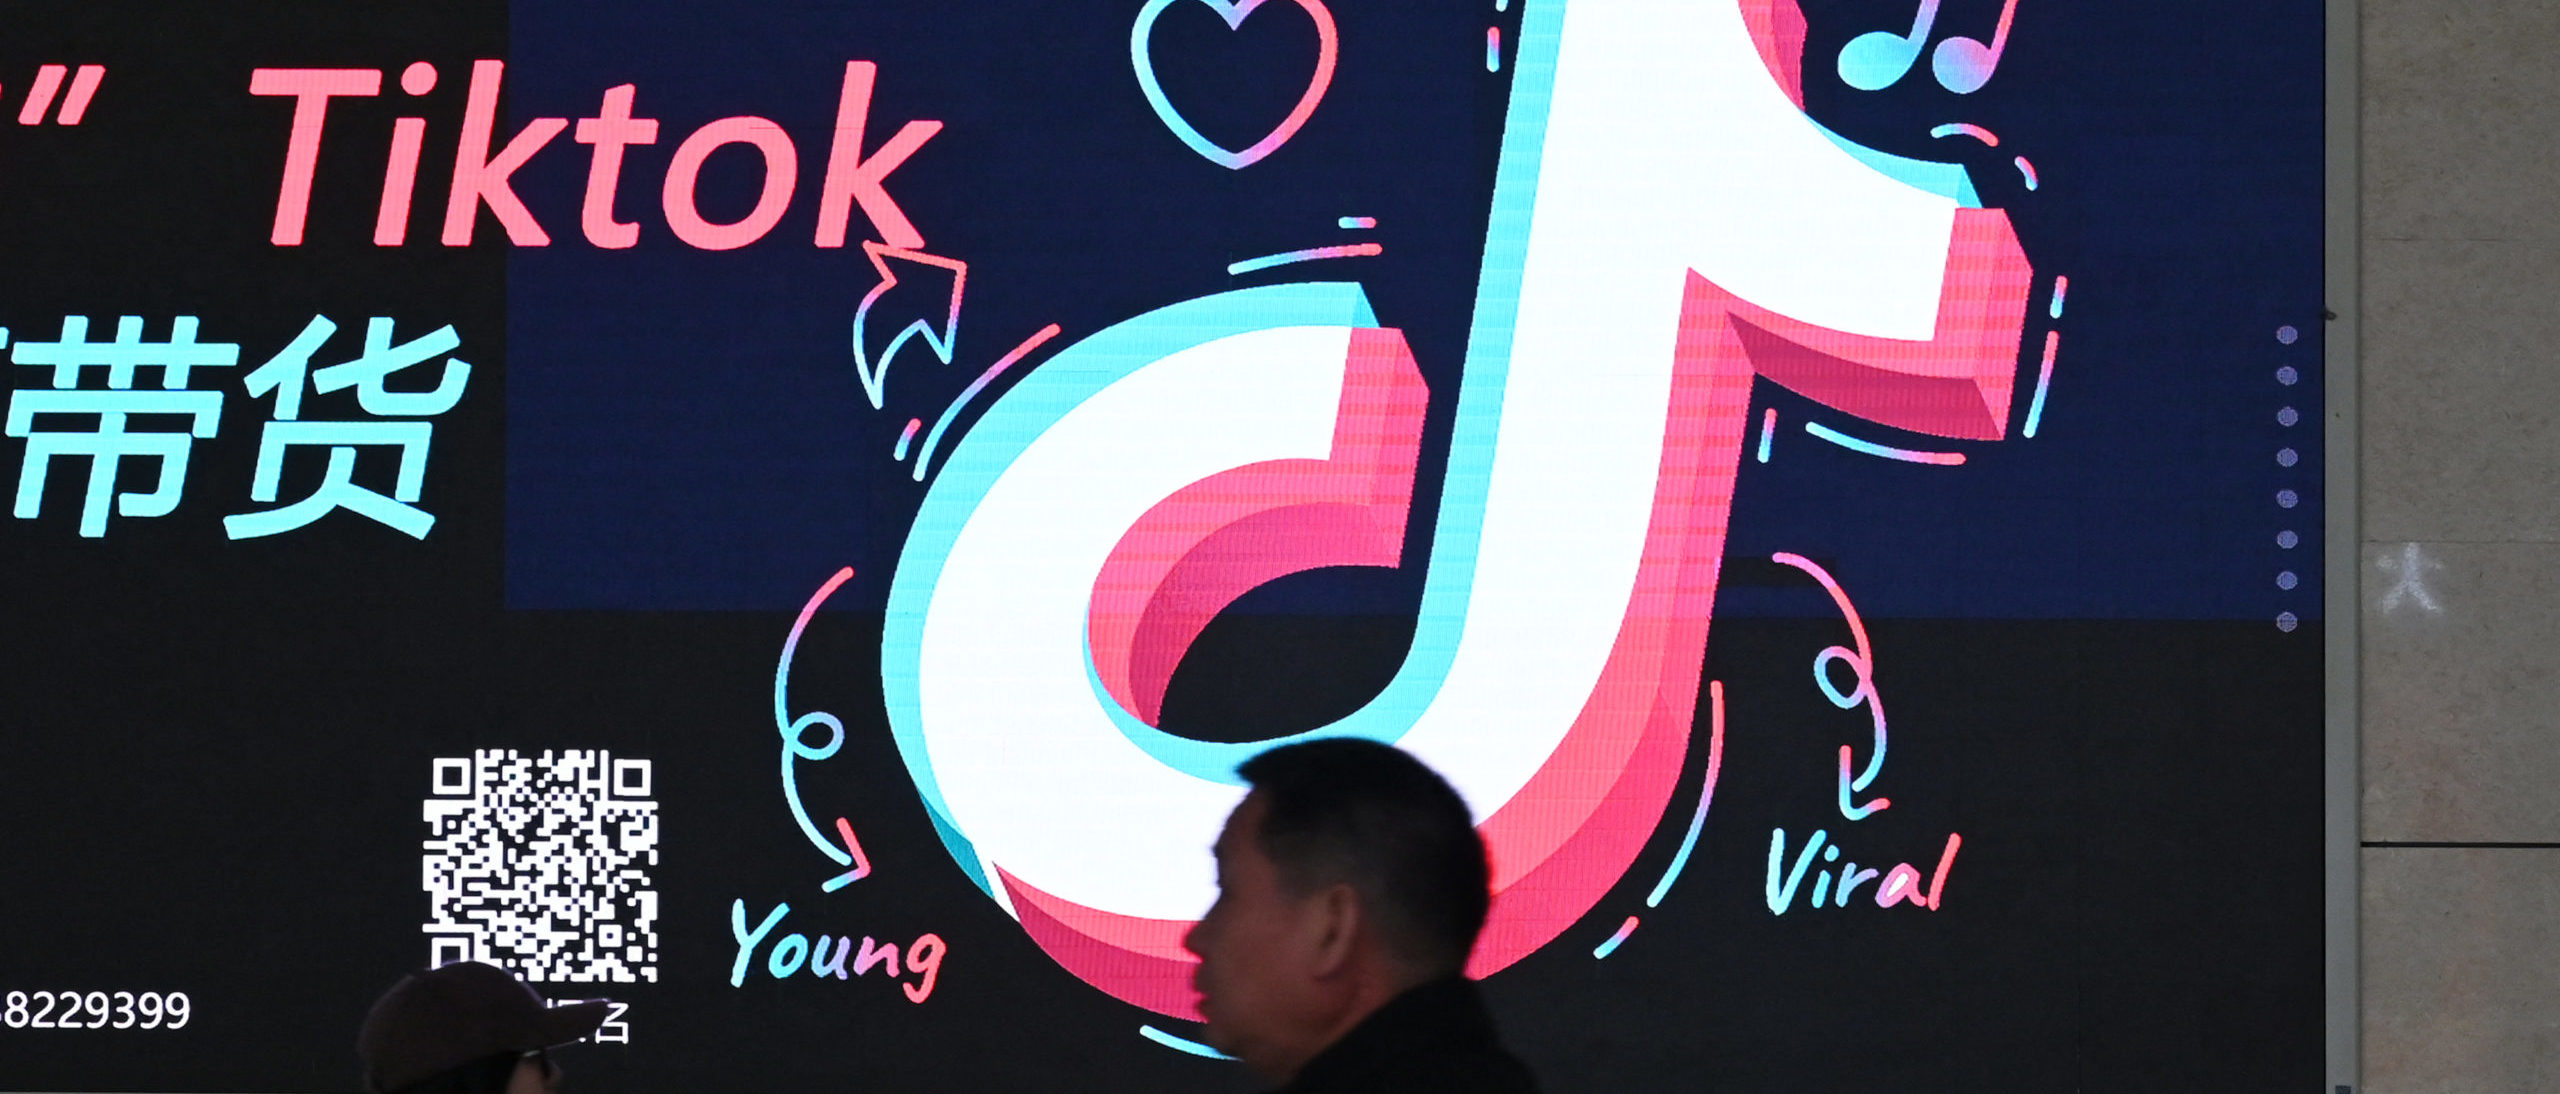 People walk past an advertisement featuring the TikTok logo at a train station in Zhengzhou, in China's central Henan province on January 21, 2024. (Photo by Greg Baker/AFP via Getty Images)